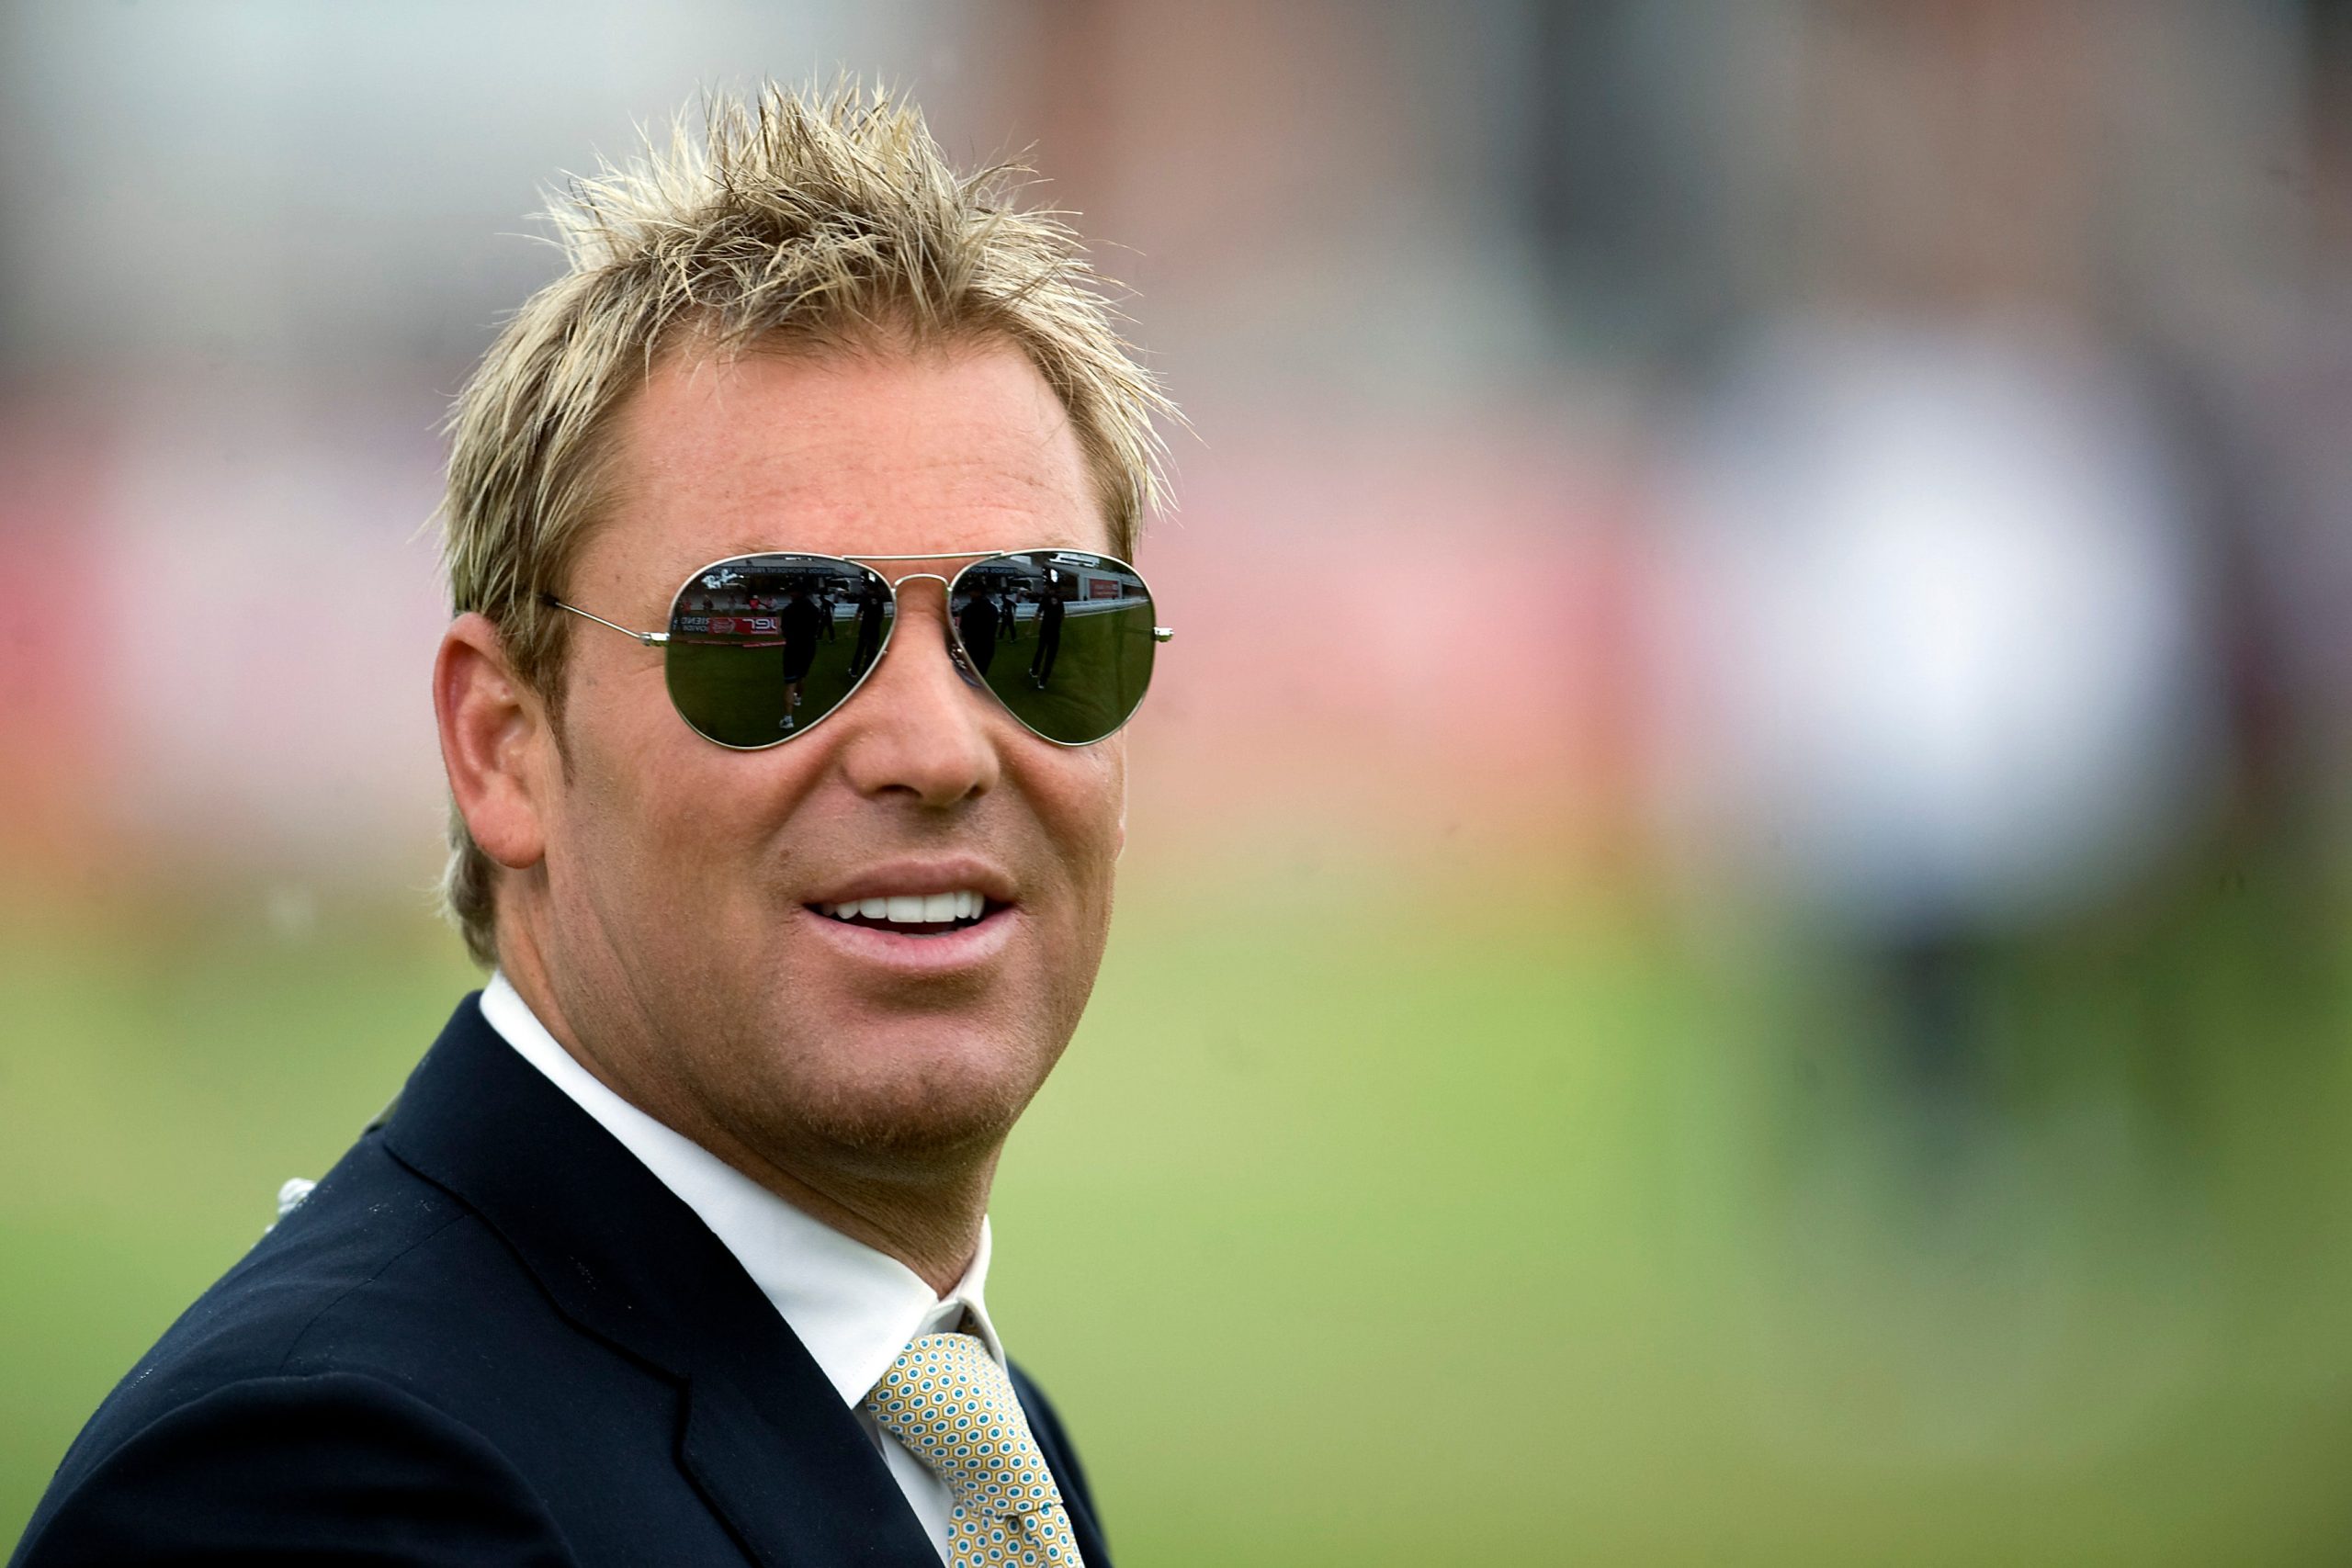 Shane Warne’s last wish was personal, here’s what he wanted in July 2022